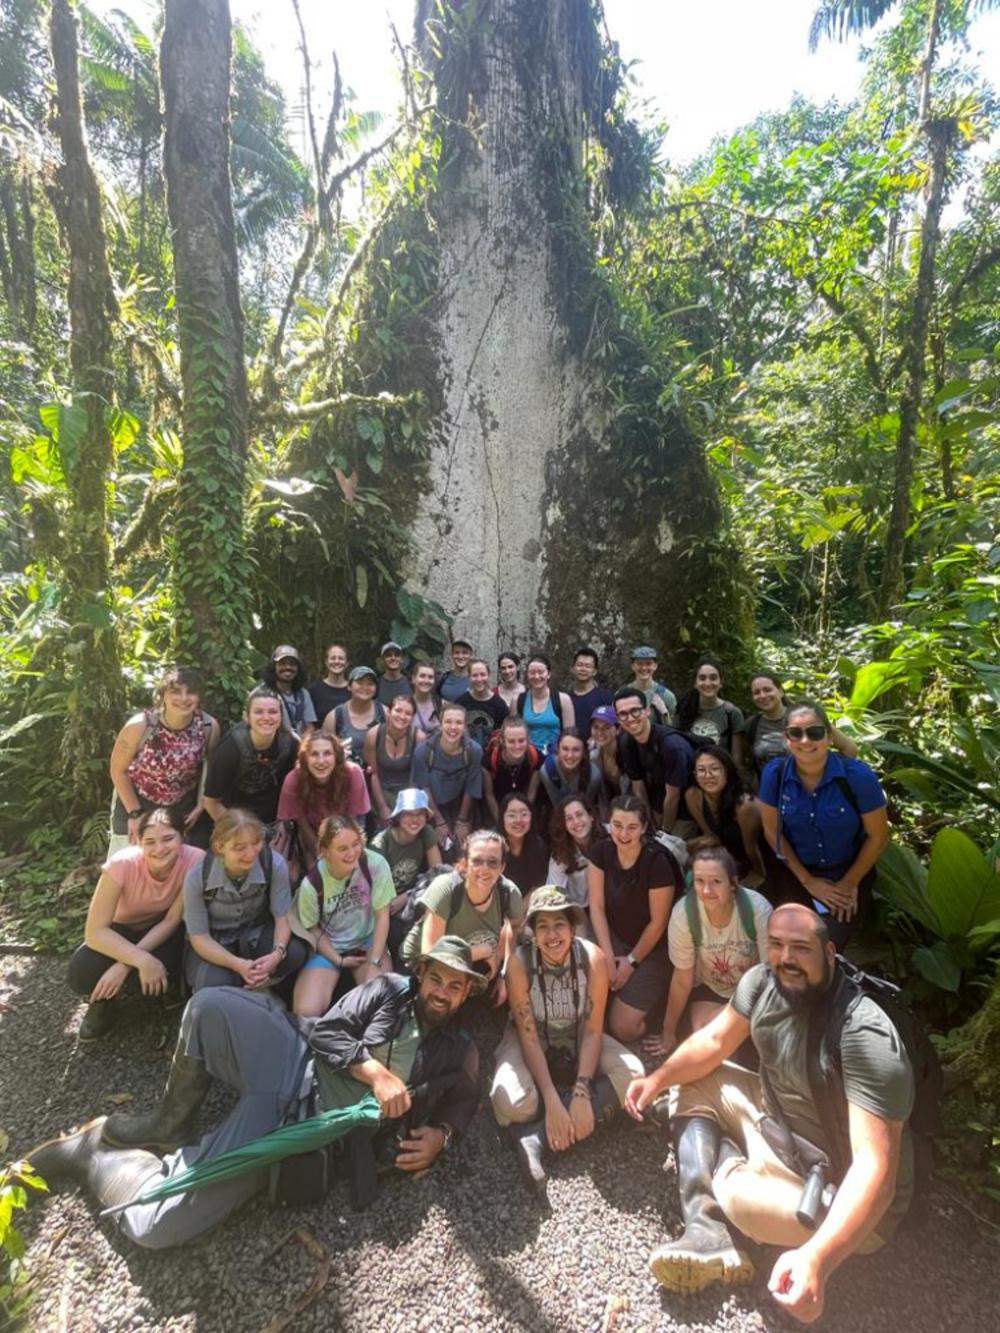 A large group of people standing in front of a large tree in the Costa Rican jungle